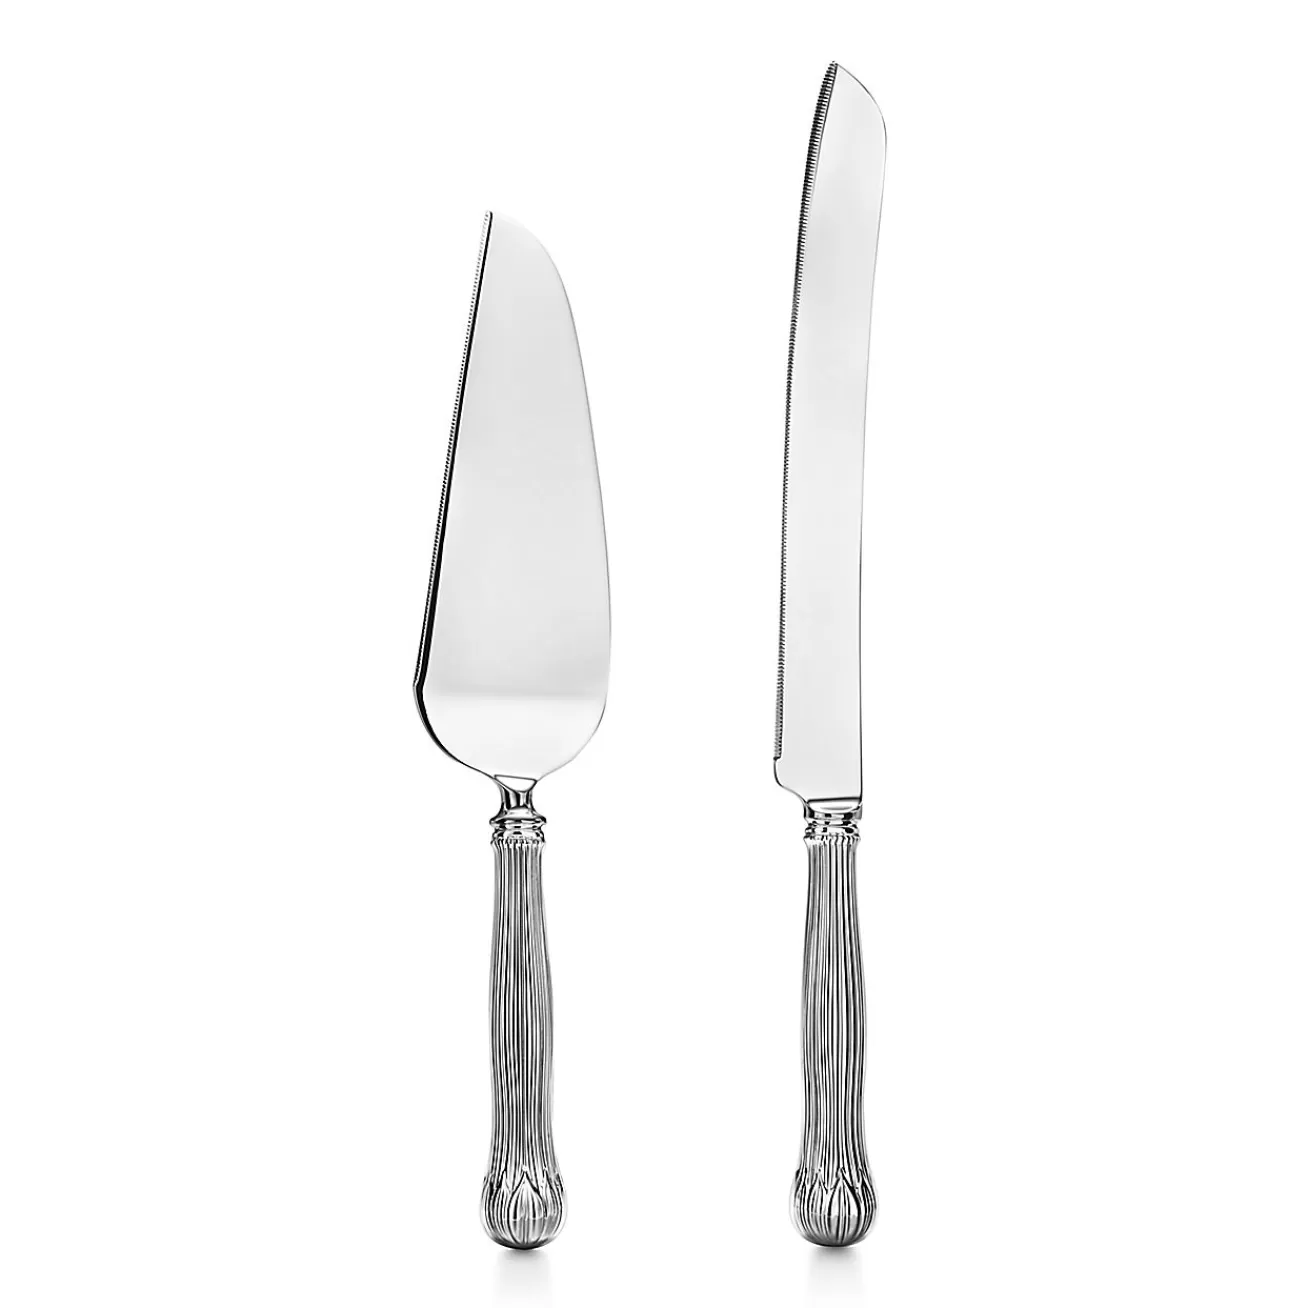 Tiffany & Co. Lotus cake knife and server in sterling silver. | ^ The Couple | Wedding Gifts